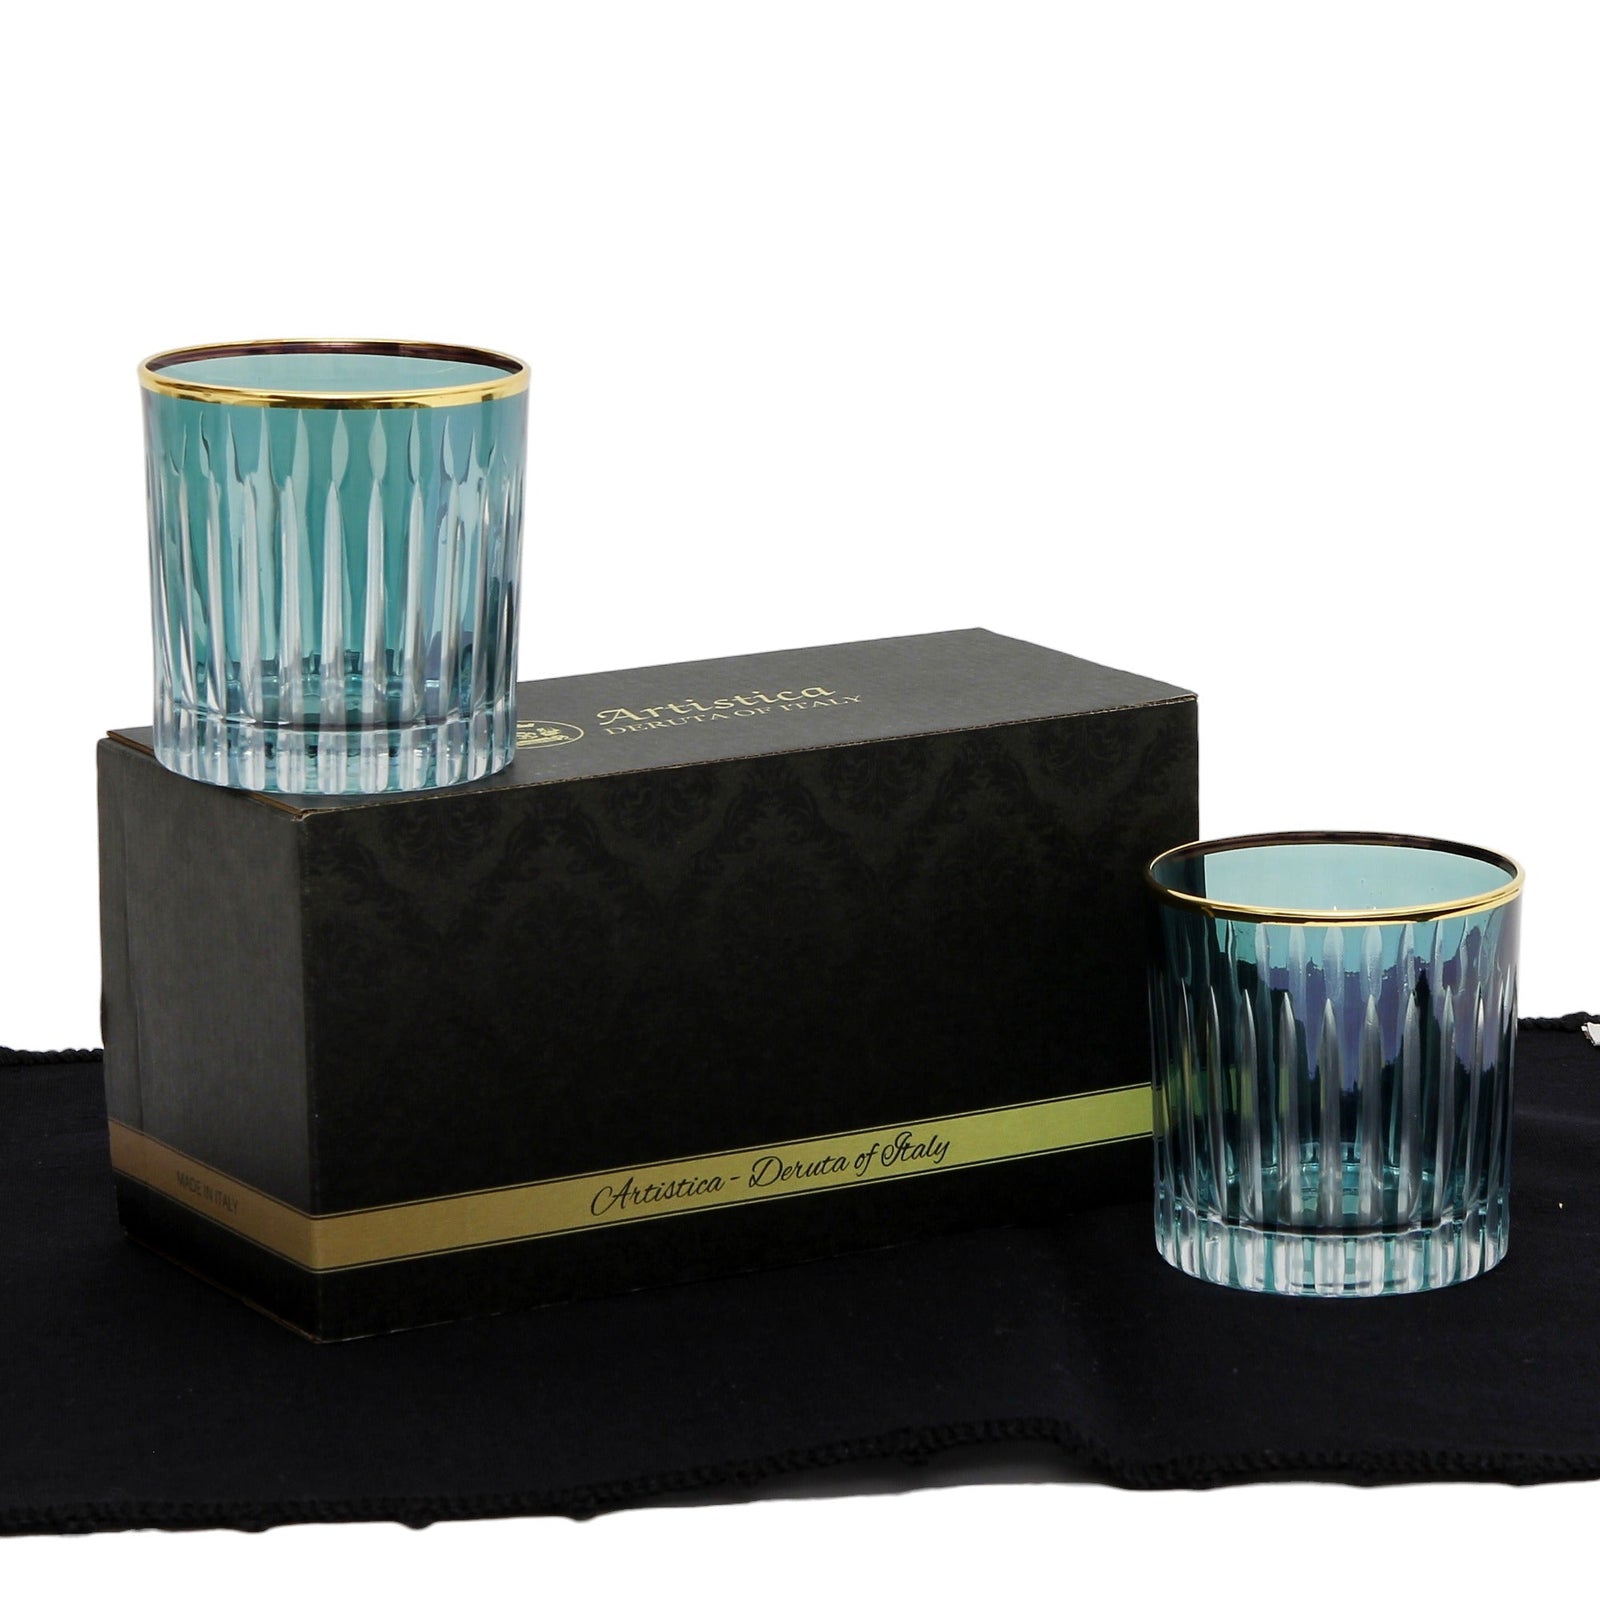 GIFT BOX With two Exquisite Italian Crystal Glass for Whiskey/Old Fashion featuring a 24 Carat Gold Rim